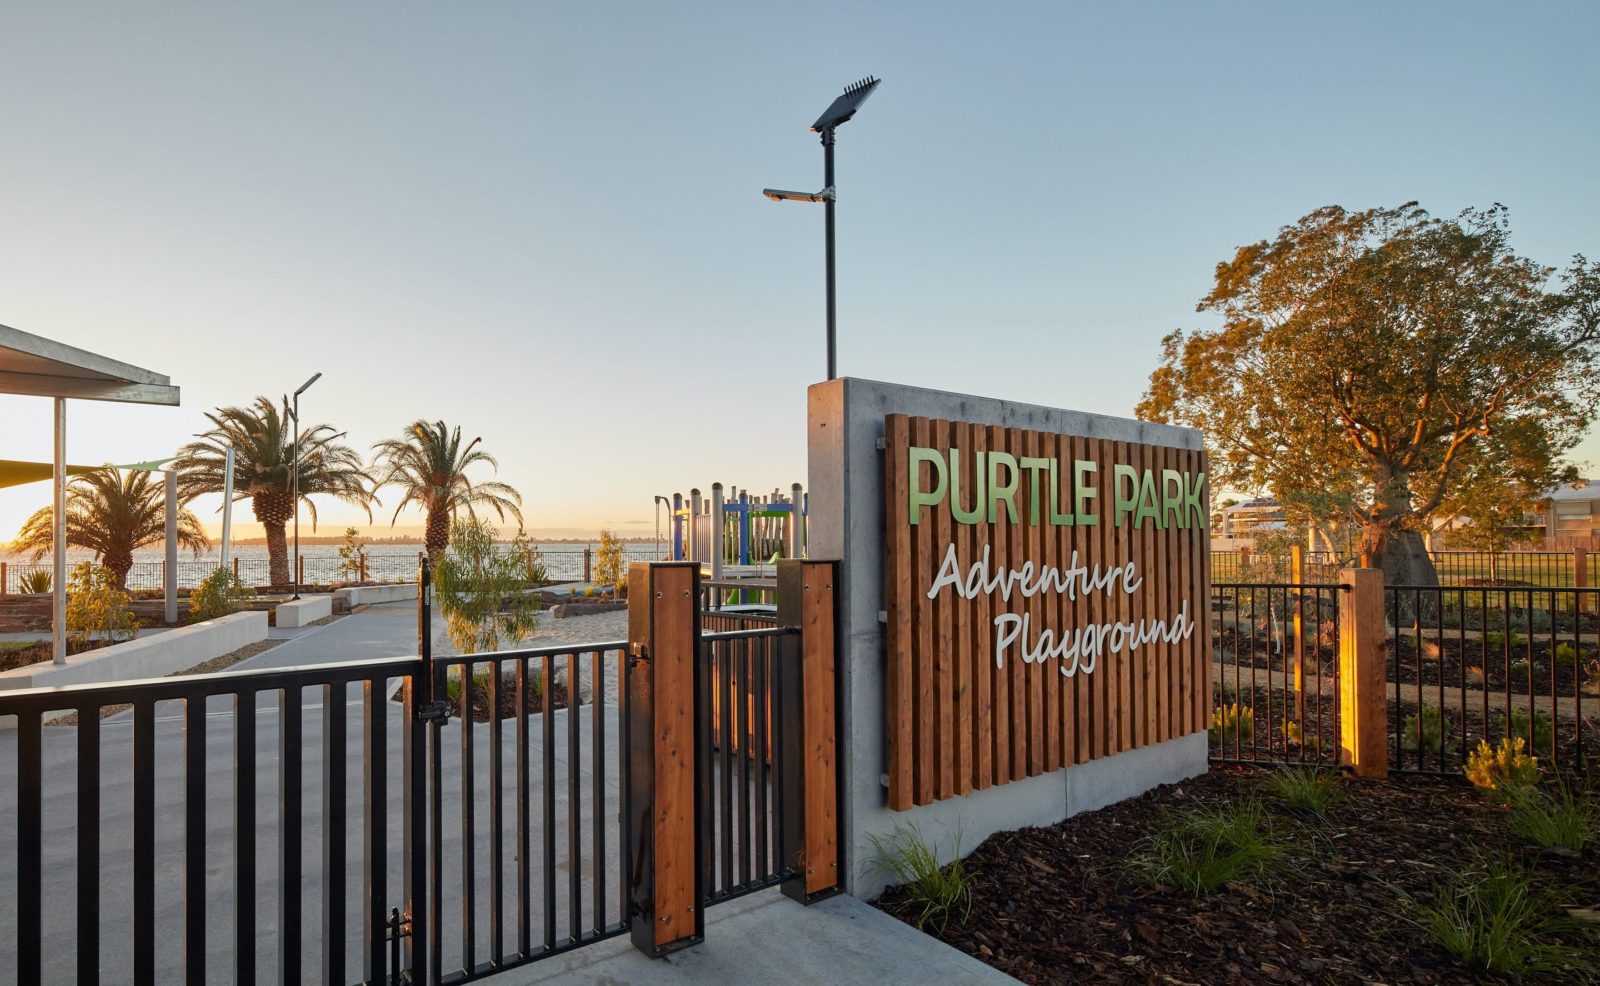 A fence and gate leading to a playground. A sign reads "Purtle Park Adventure Playground".